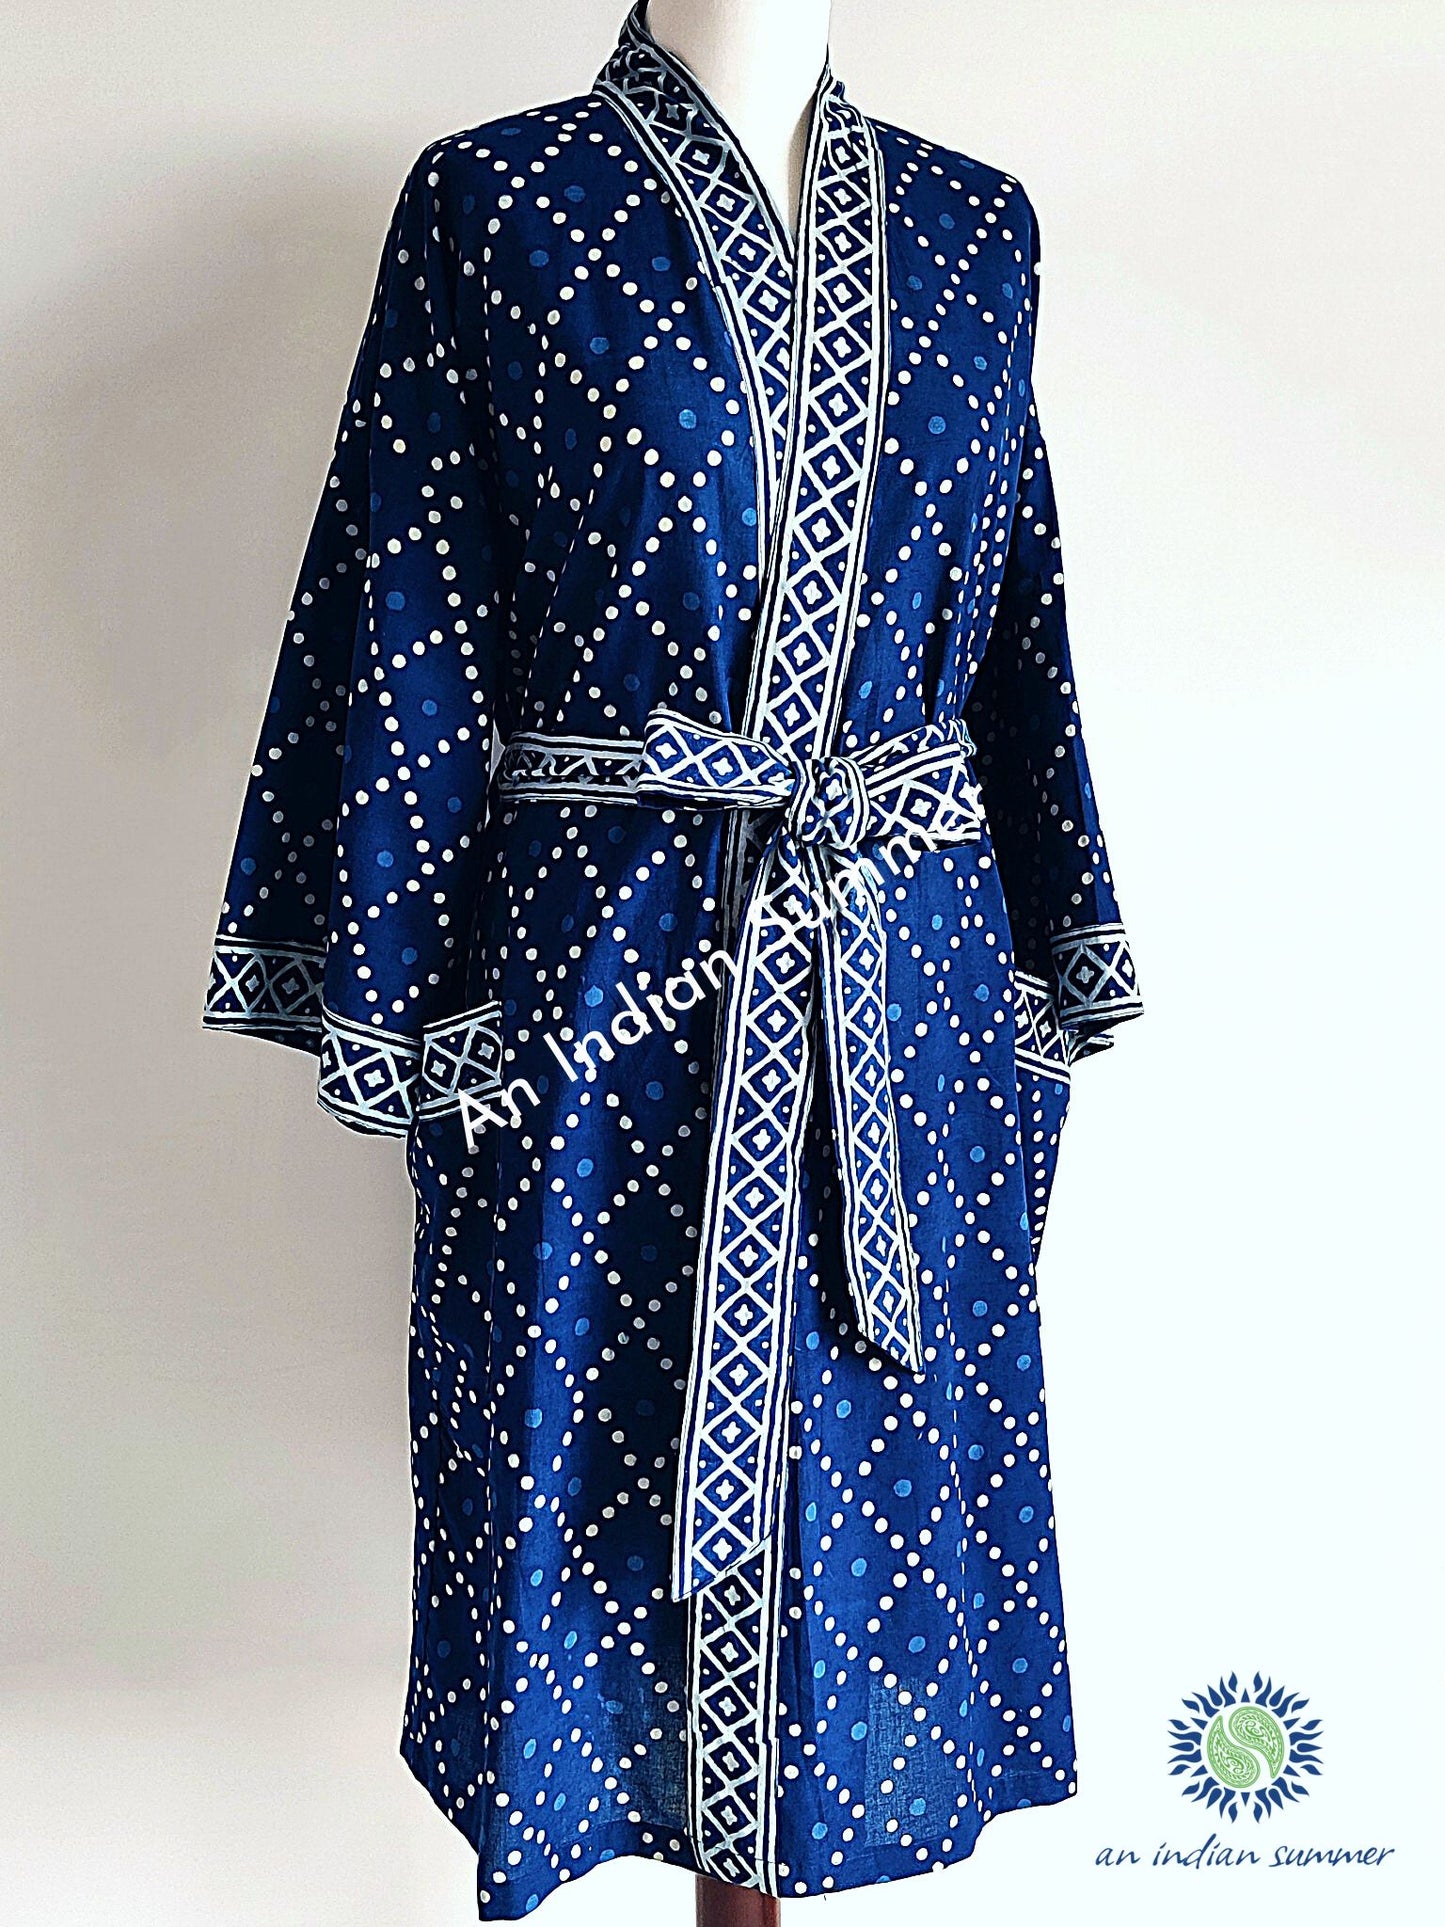 Short Kimono Robe | Natural Indigo Dyed Plant Dye | Dots Design Block Print | Hand Block Printed | Cotton Voile | An Indian Summer | Seasonless Timeless Sustainable Ethical Authentic Artisan Conscious Clothing Lifestyle Brand